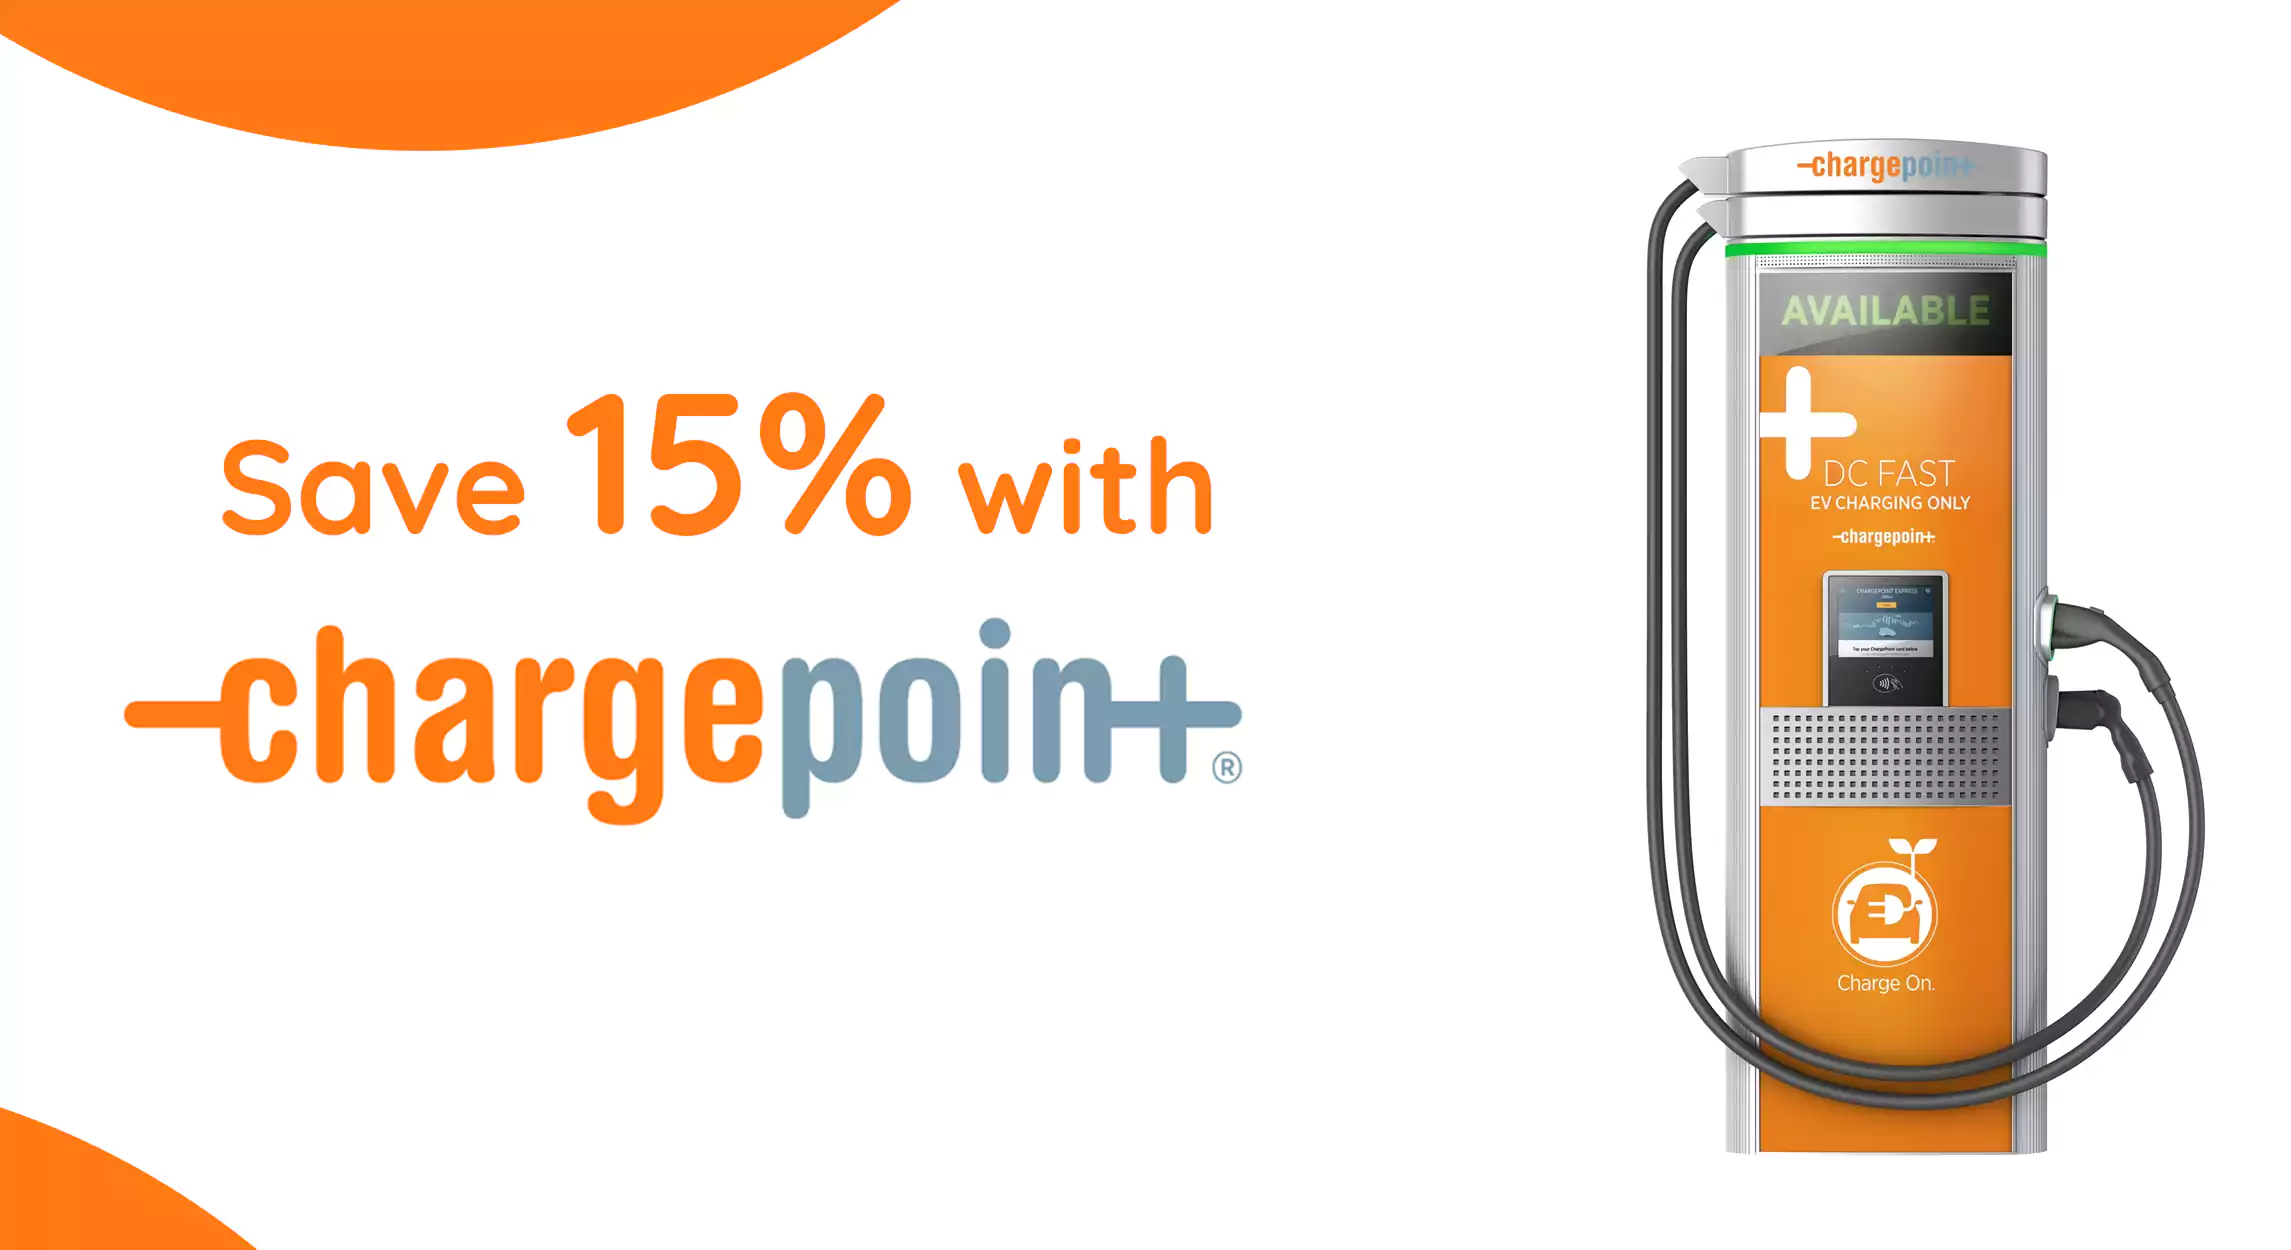 Save 15% with Charge Point.com Promo Code